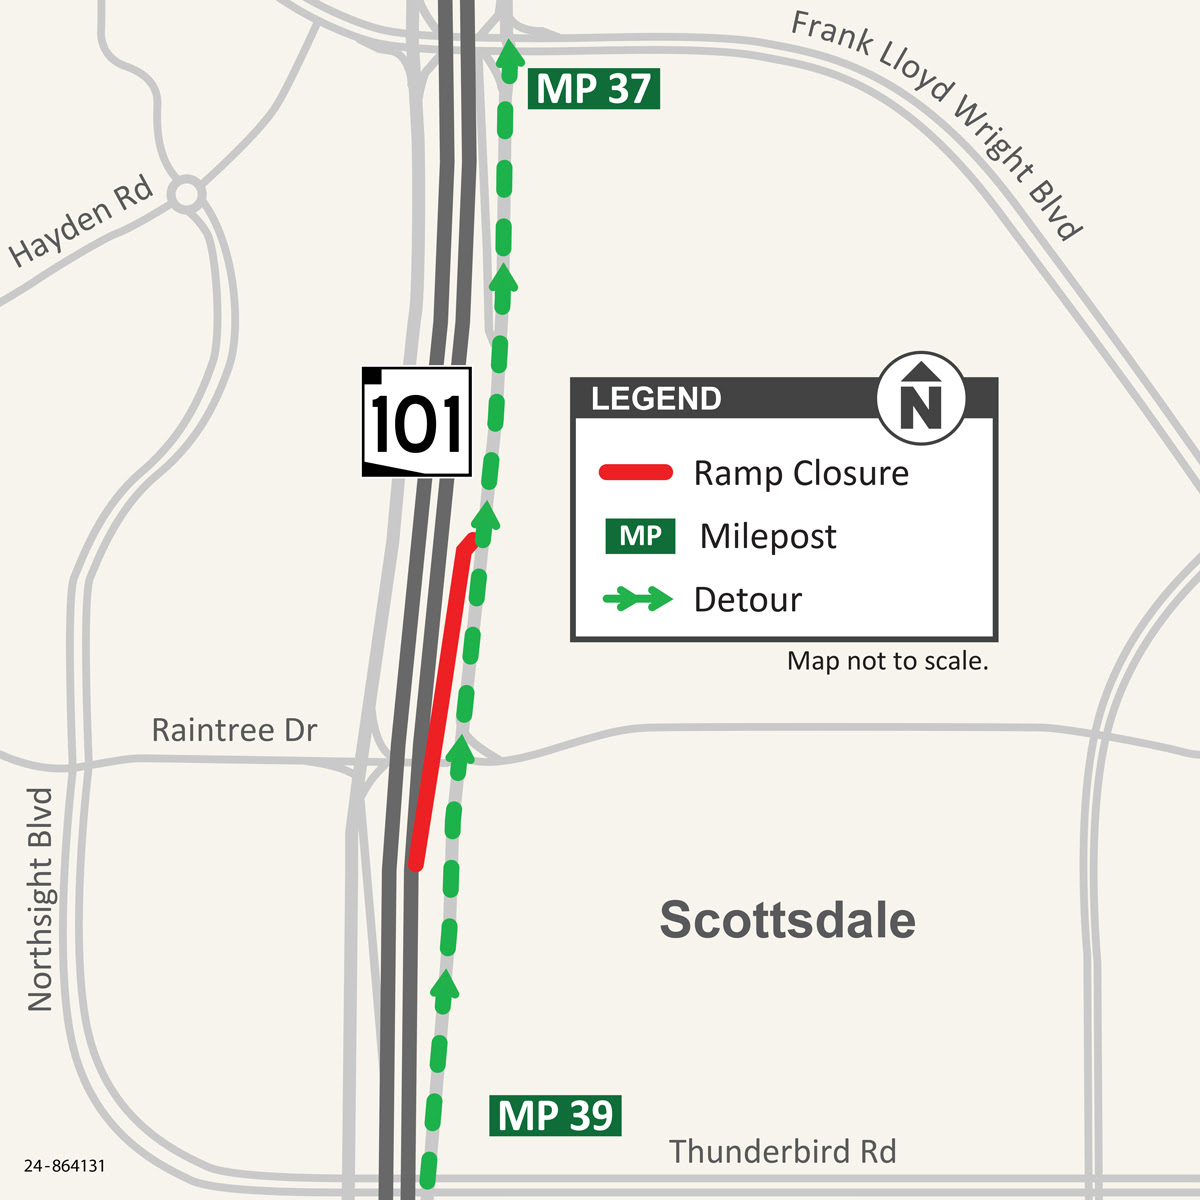 ADOT Map: Northbound Loop 101 off-ramp at Frank Lloyd Wright Blvd closing for two months